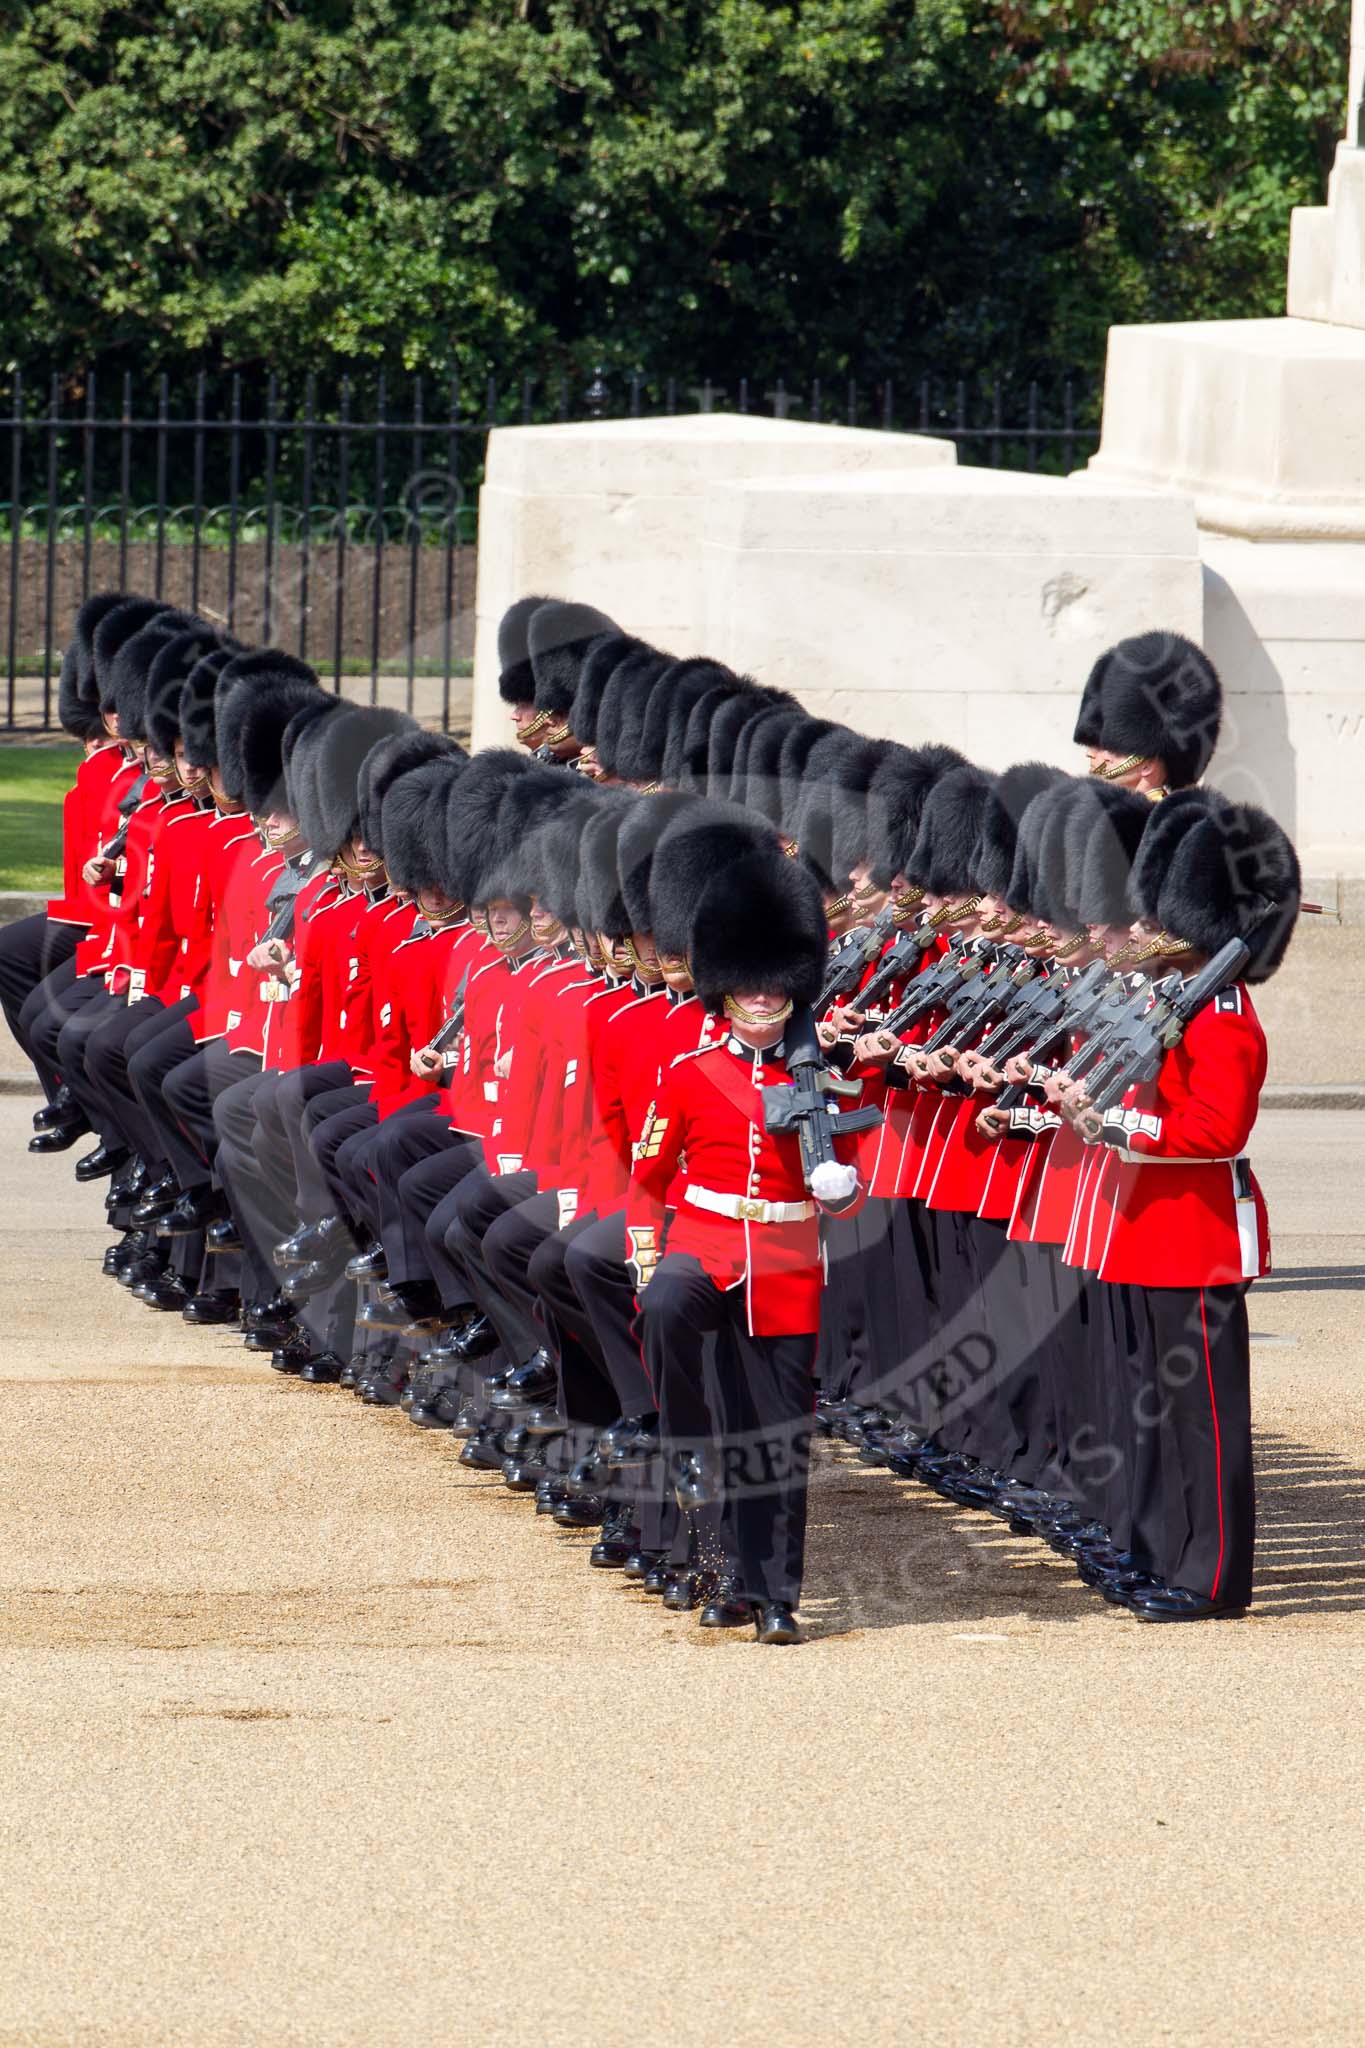 The Colonel's Review 2011: No. 3 Guard, F Company Scots Guards, taking up their place on the parade ground. In the background the Guards Memorial, in front Company Sergeant Major N D Lawrie..
Horse Guards Parade, Westminster,
London SW1,

United Kingdom,
on 04 June 2011 at 10:35, image #50